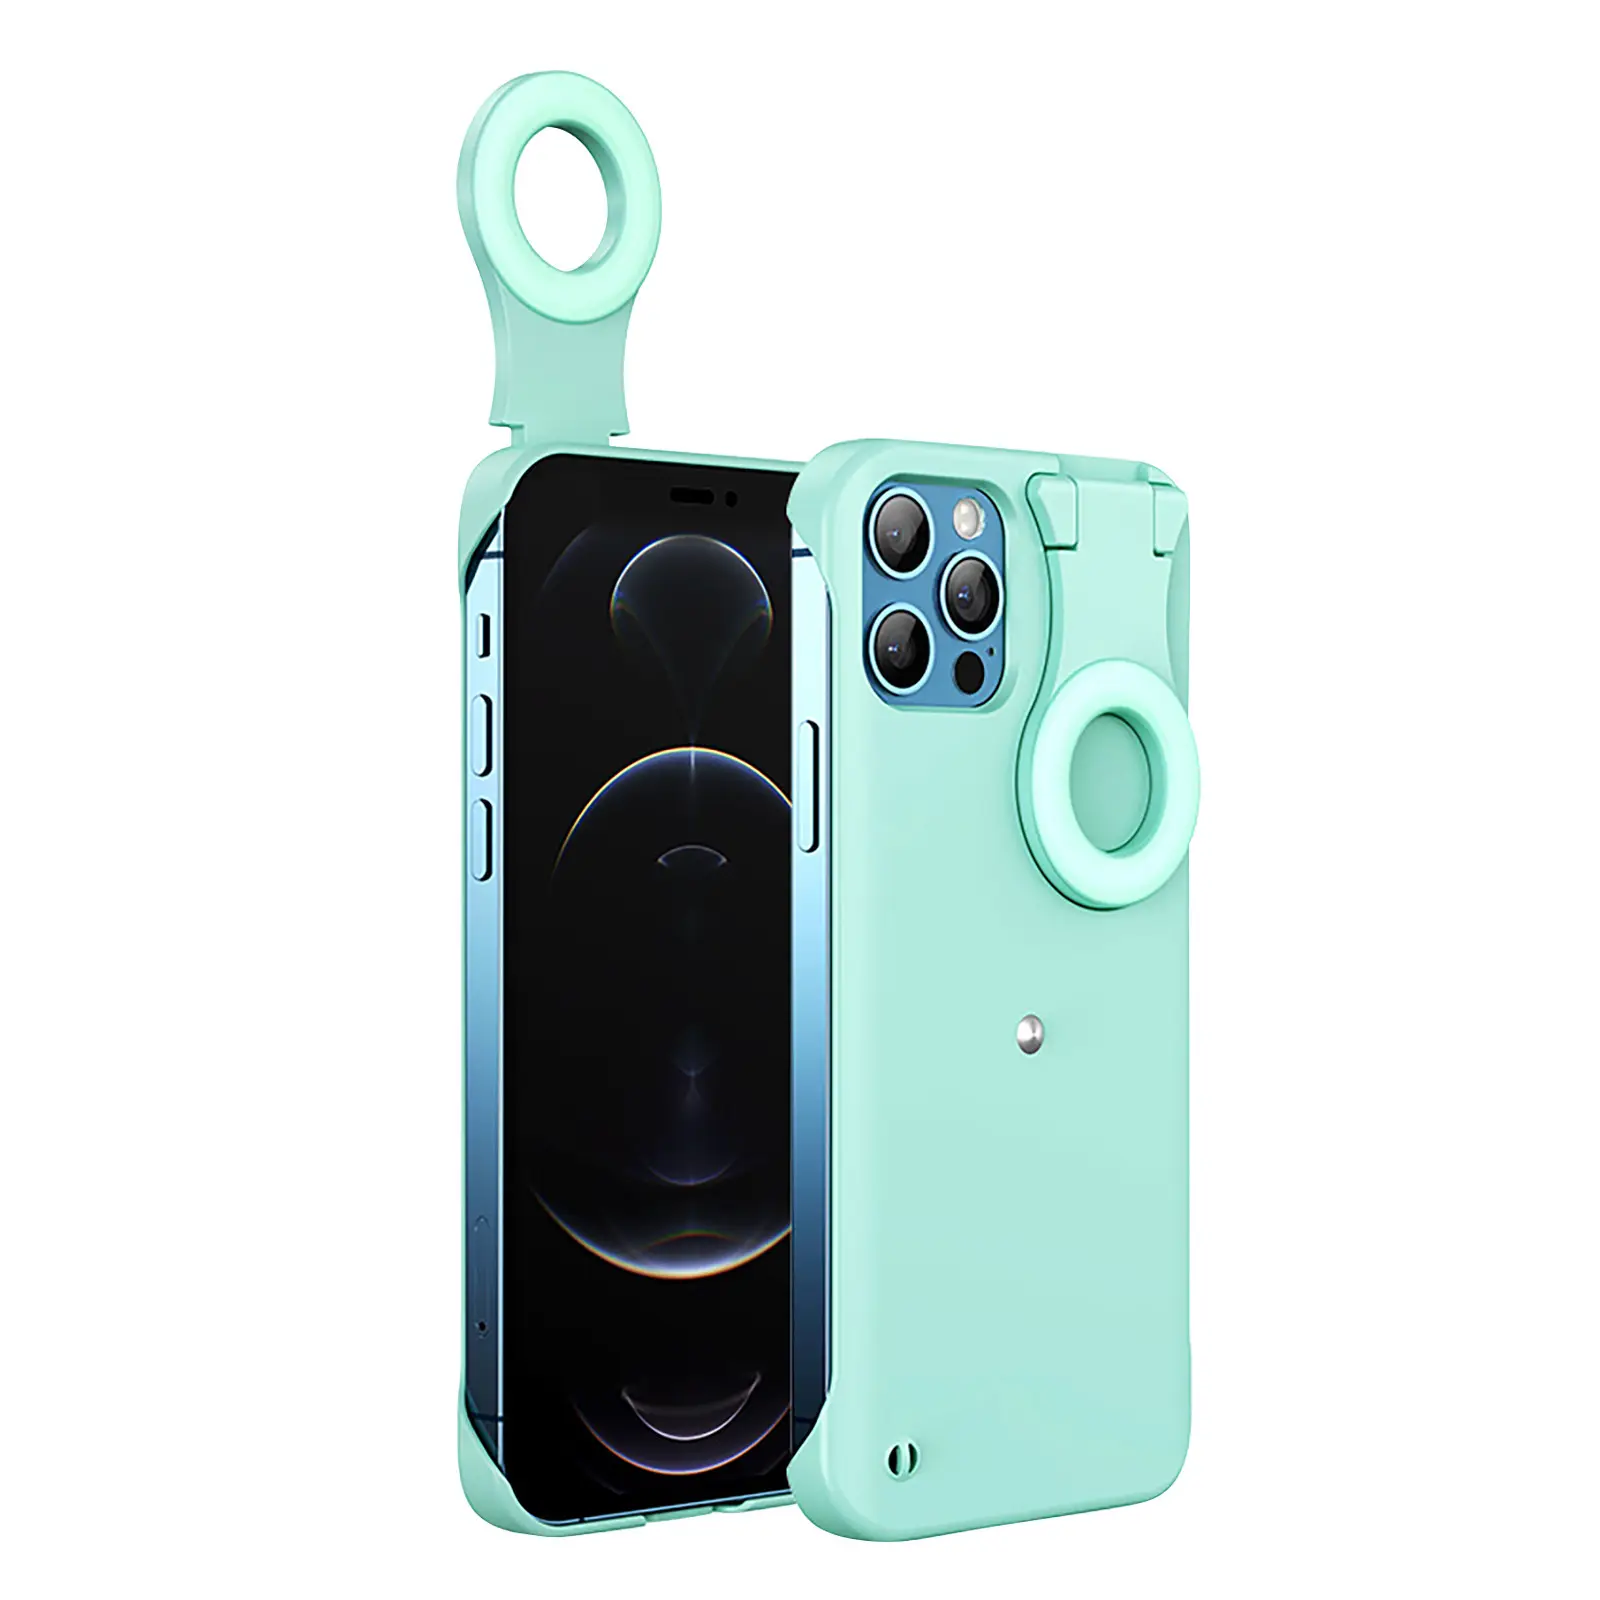 LED Selfie Light Up Camera Ring Phone Case for iPhone 12 11 Pro Max XS Max X XR 8 7 Plus 6 6S Case With Flash Light